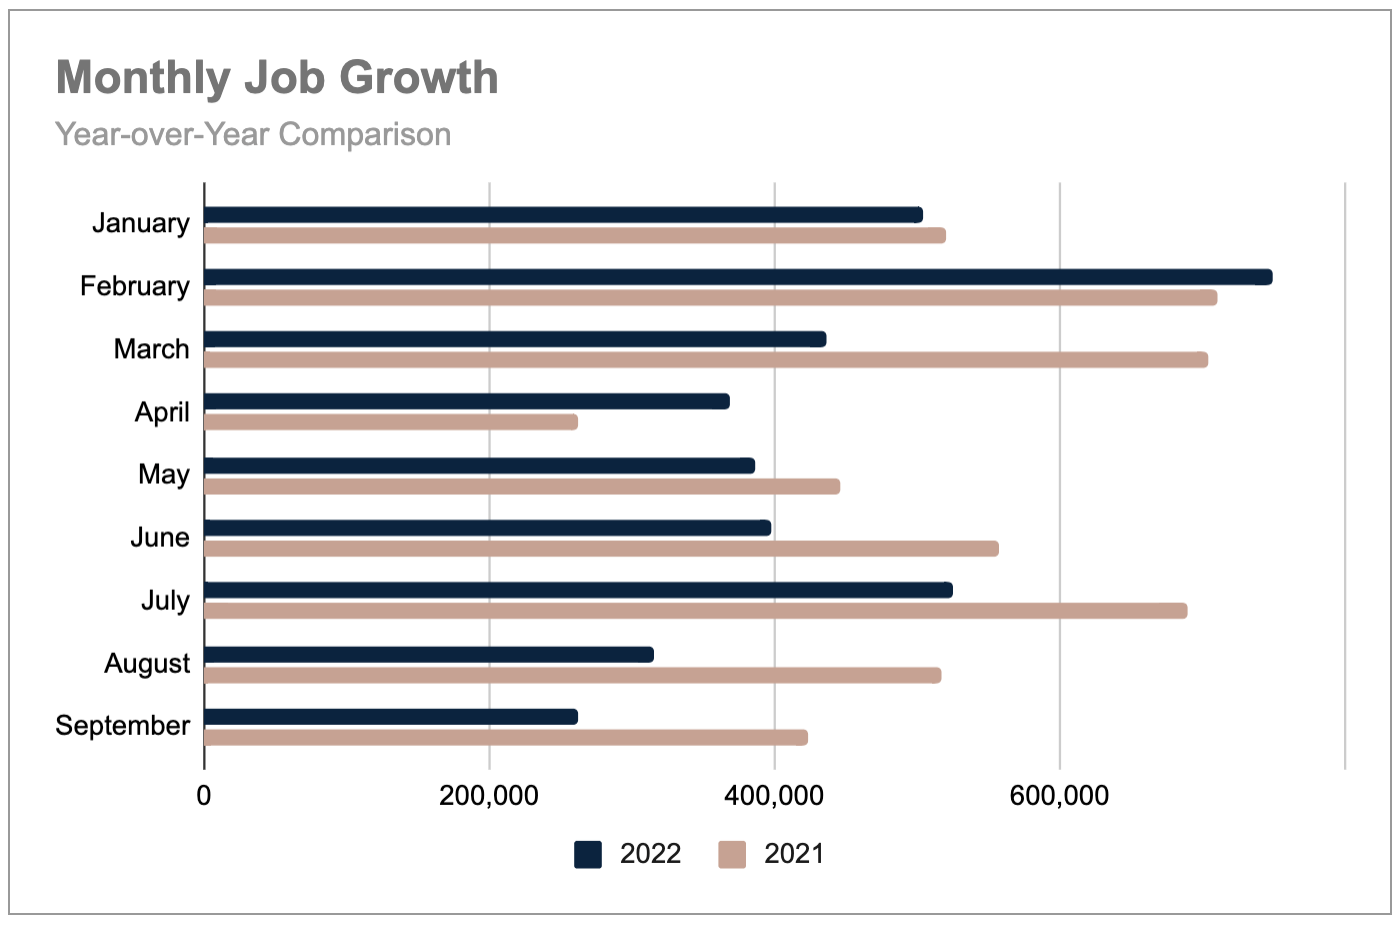 Monthly job growth, year-over-year comparison